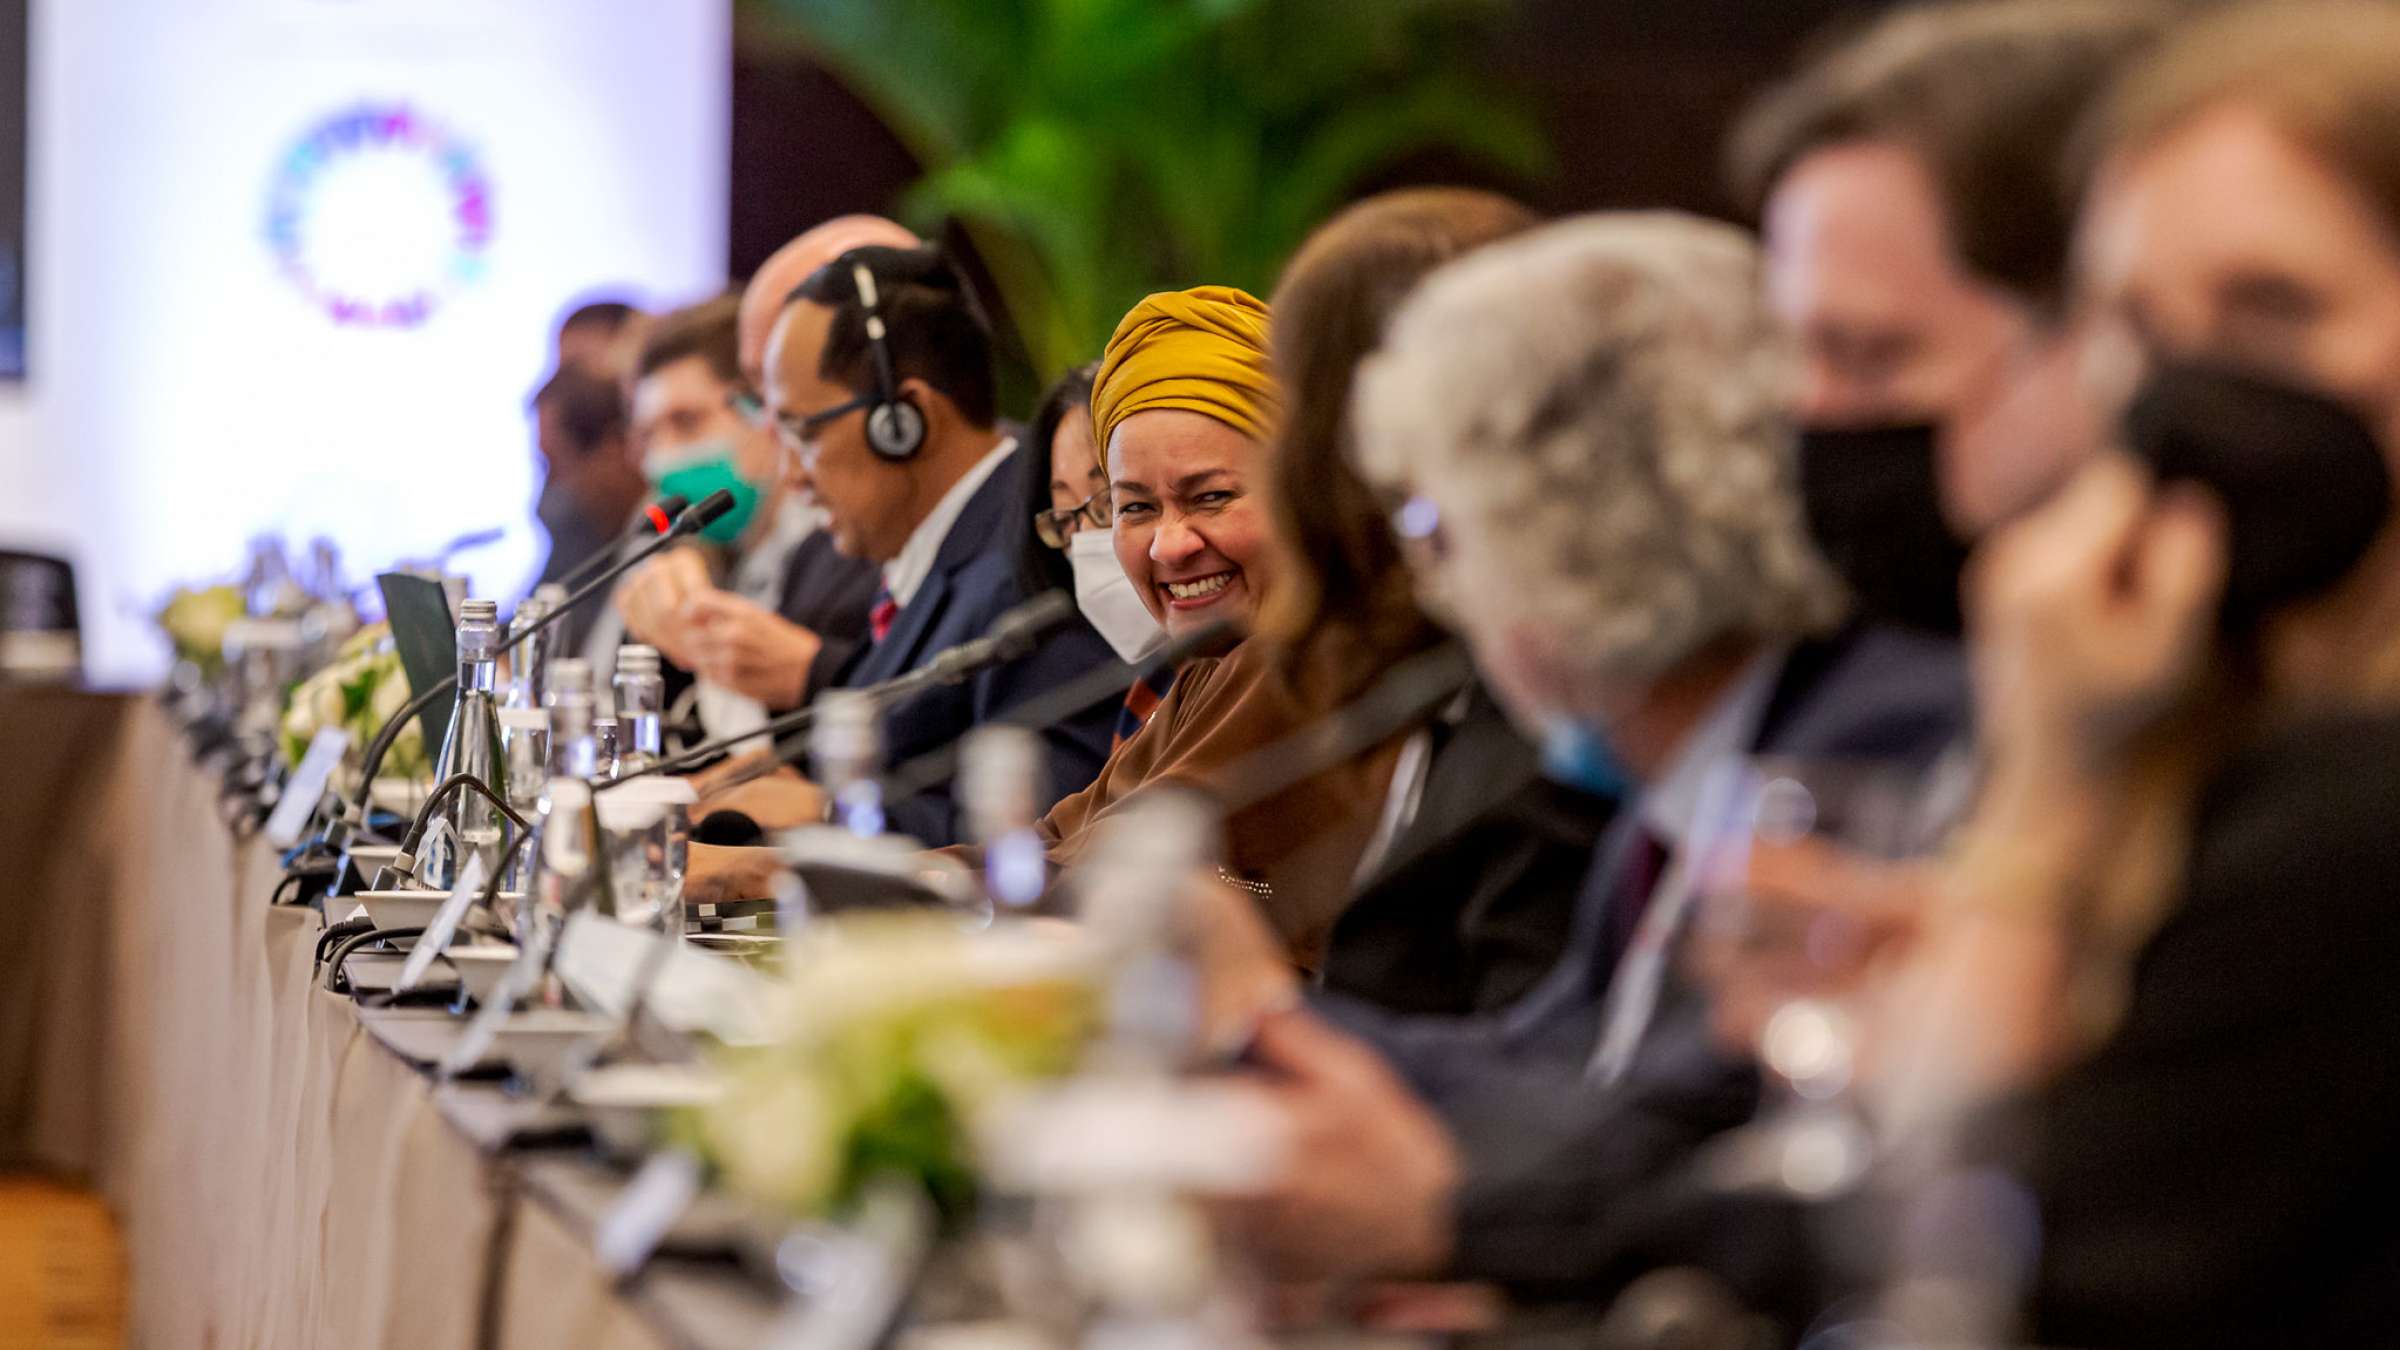 Ministerial Roundtable: Scaling up Disaster Risk Reduction to Tackle the Climate Emergency, Global Platform for Disaster Risk Reduction, 25 May 2022, Bali, Indonesia